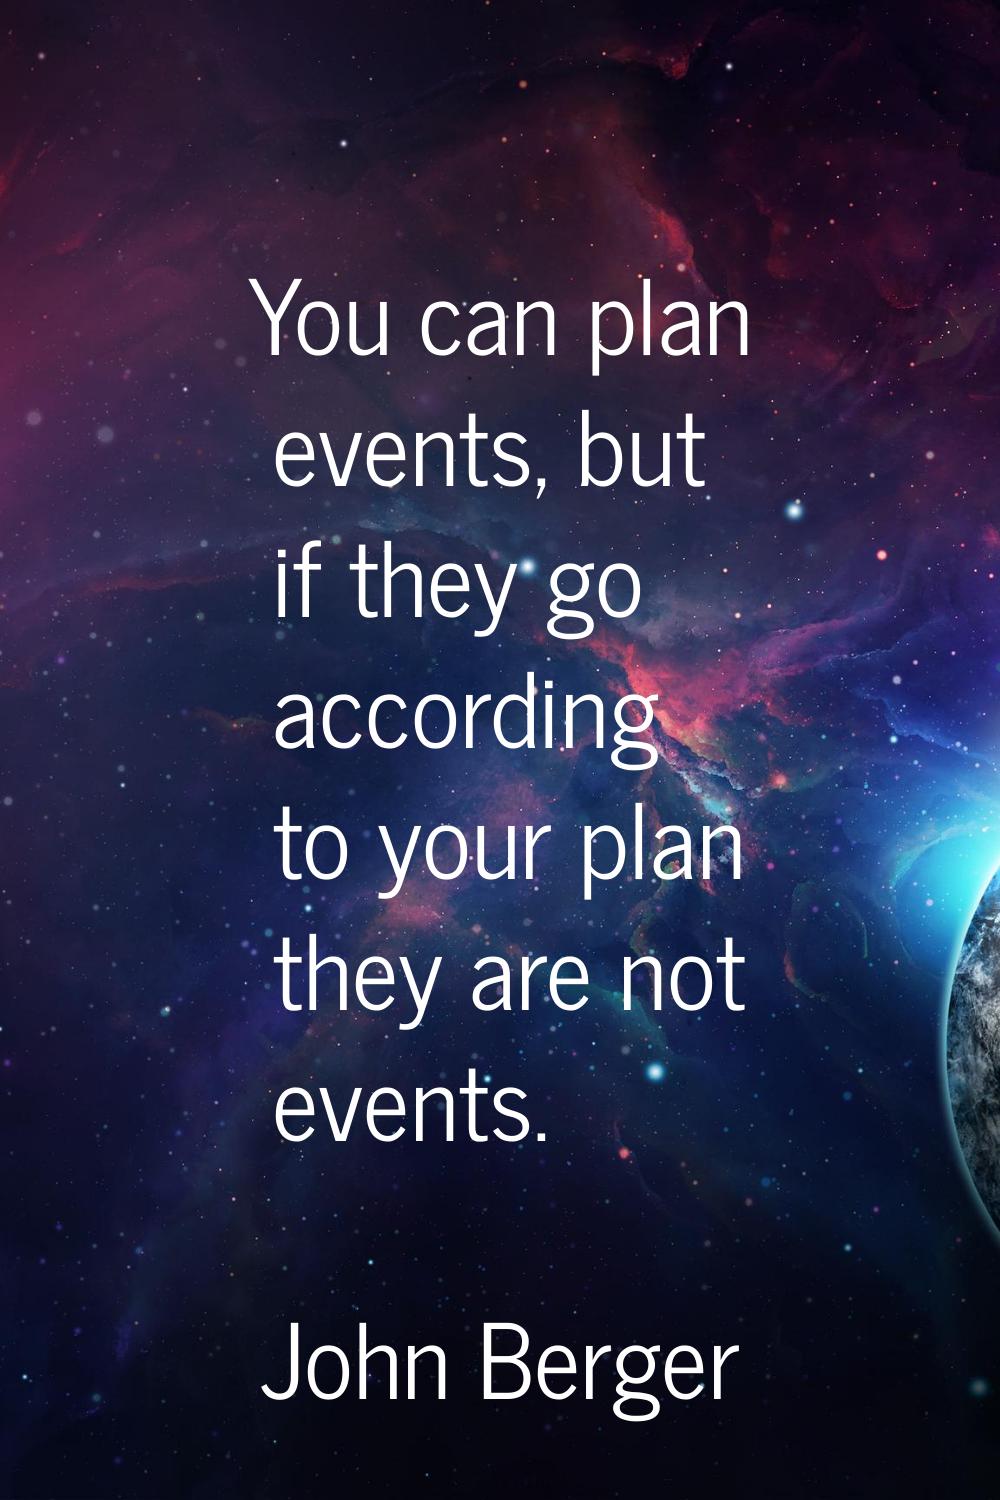 You can plan events, but if they go according to your plan they are not events.